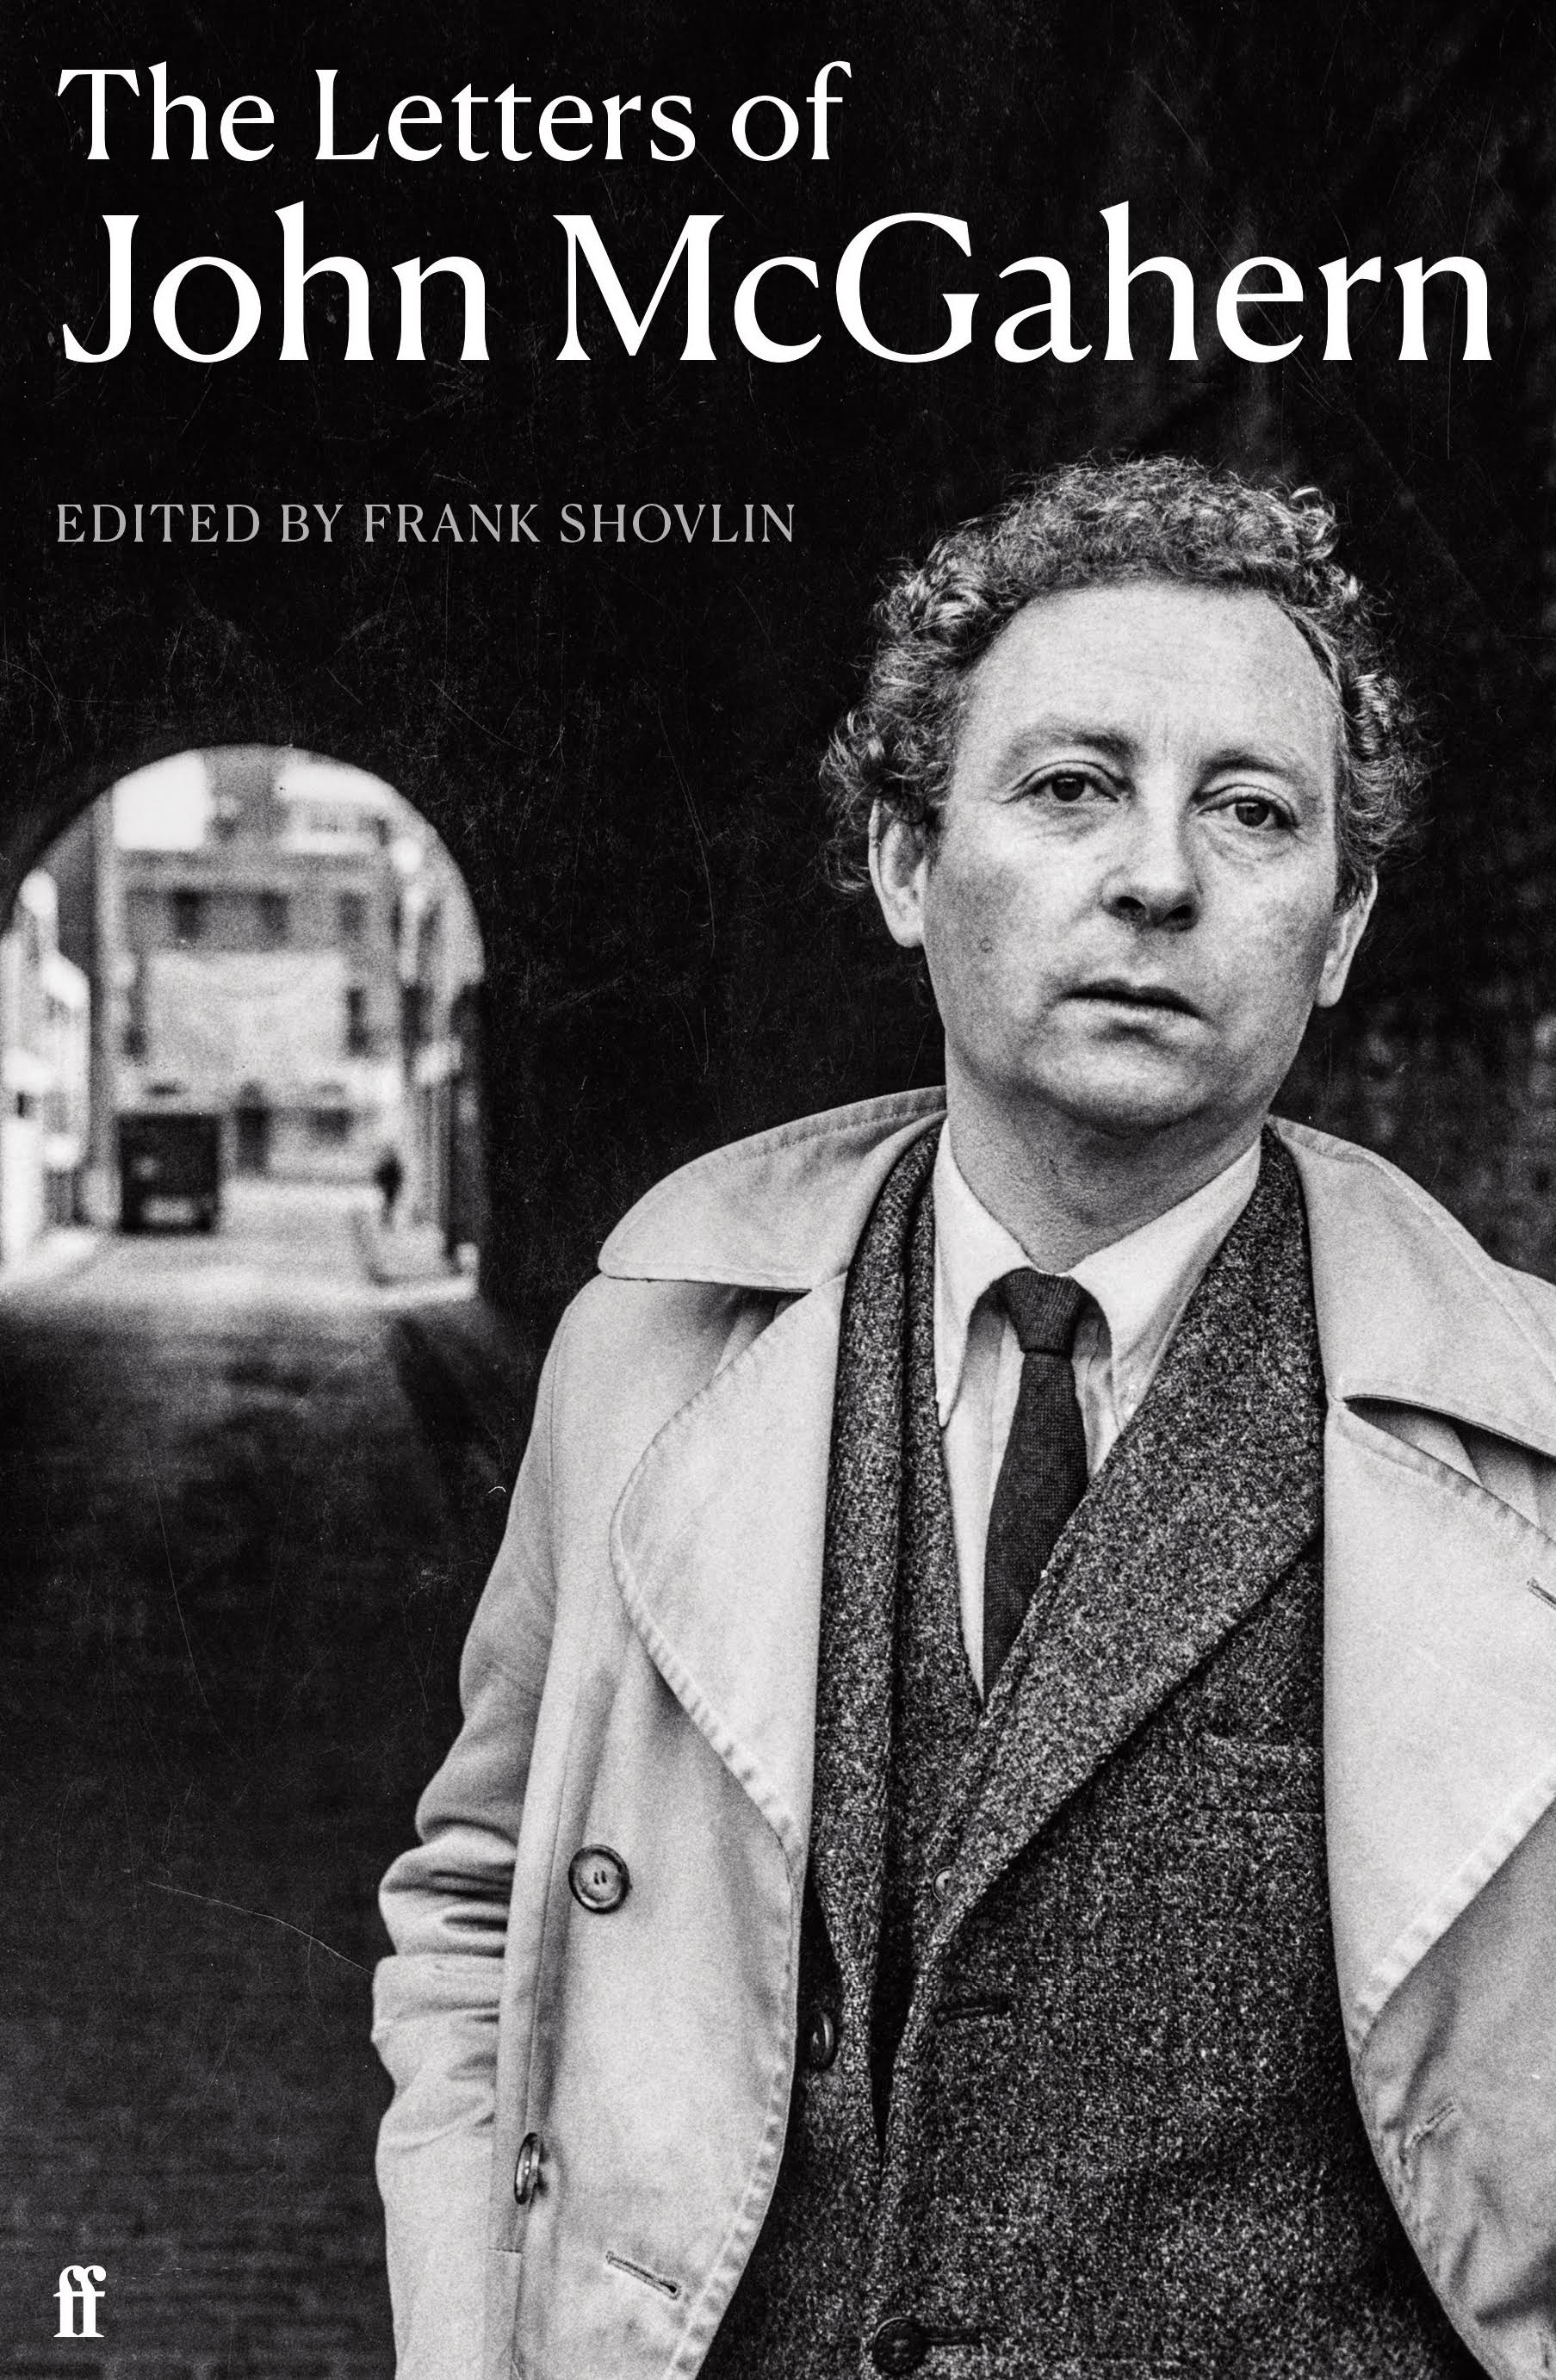 The Letters of John McGahern [Book]